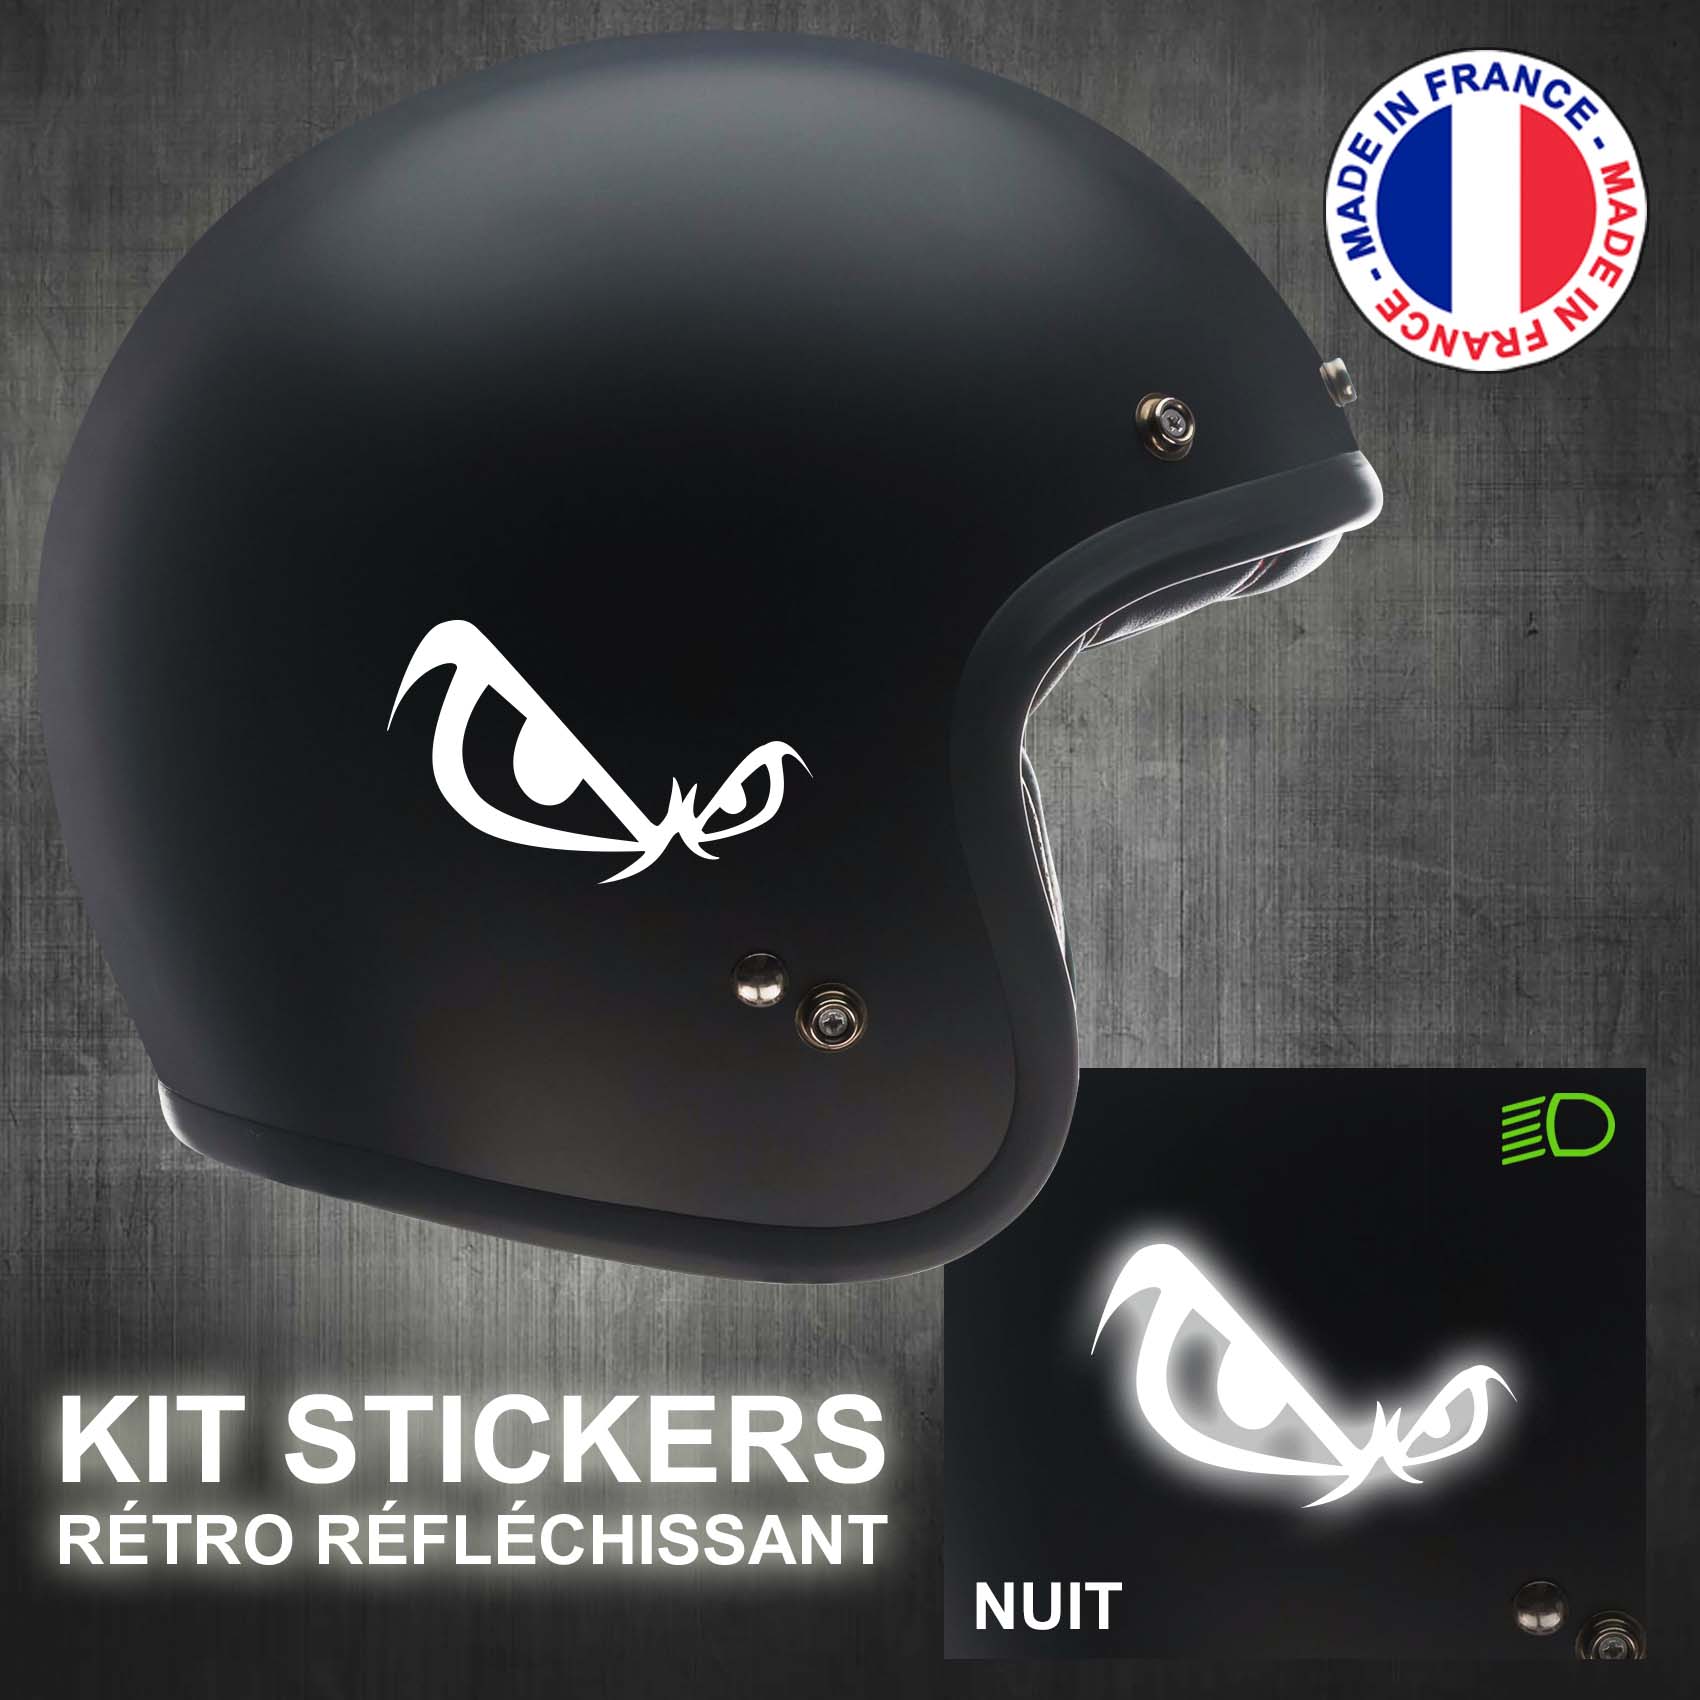 stickers-casque-moto-no-fear-ref1-retro-reflechissant-autocollant-noir-moto-velo-tuning-racing-route-sticker-casques-adhesif-scooter-nuit-securite-decals-personnalise-personnalisable-min